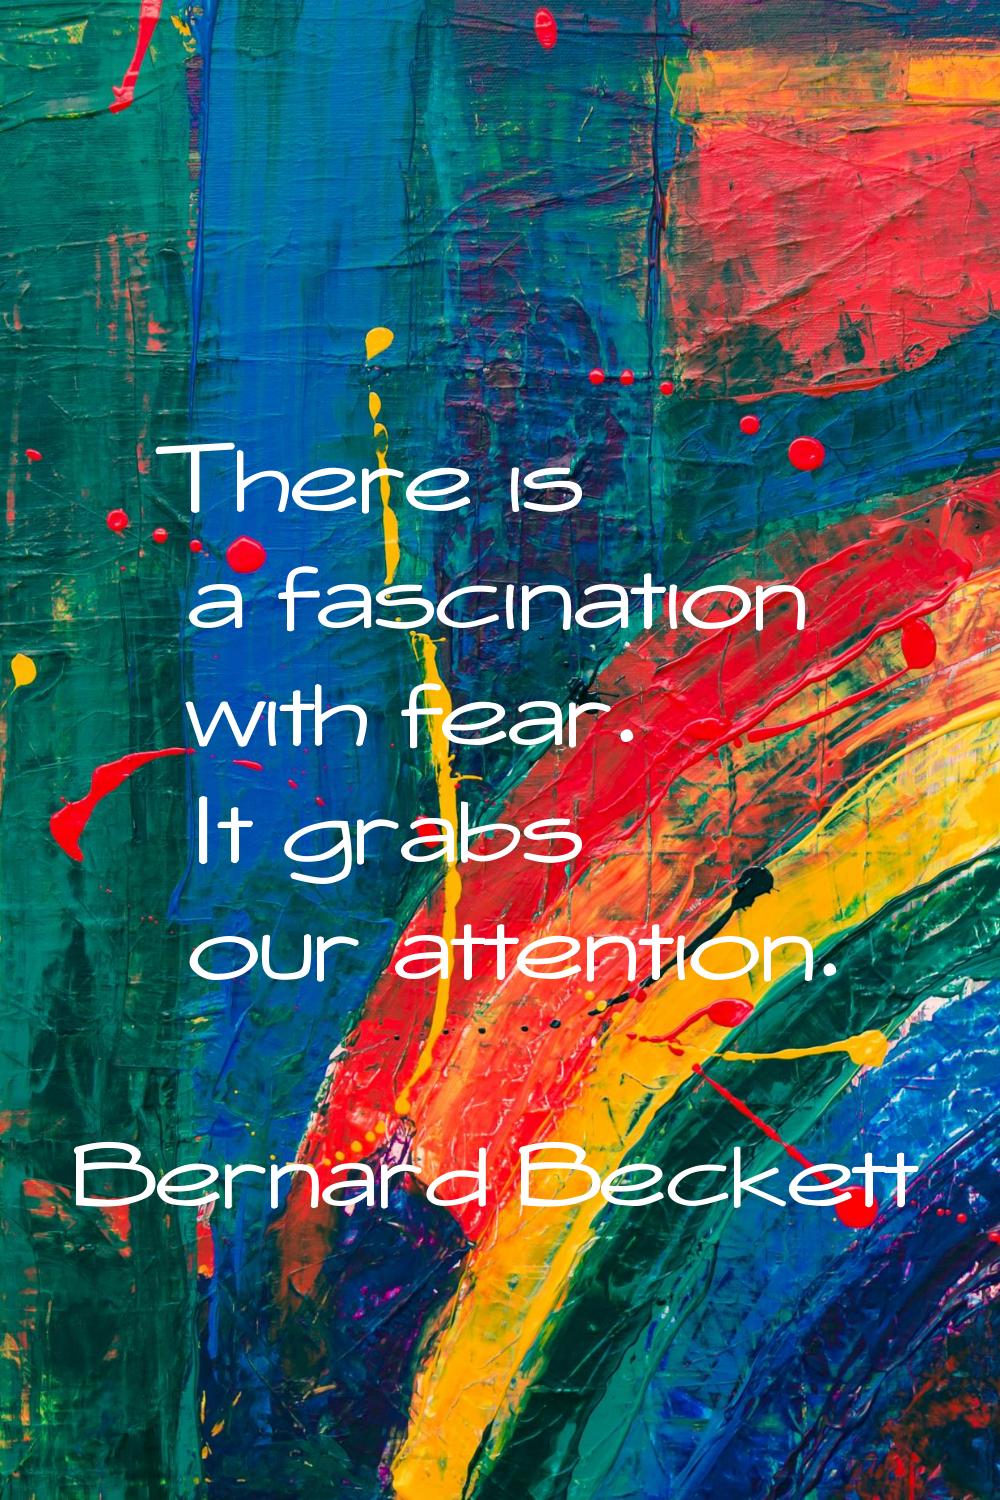 There is a fascination with fear. It grabs our attention.